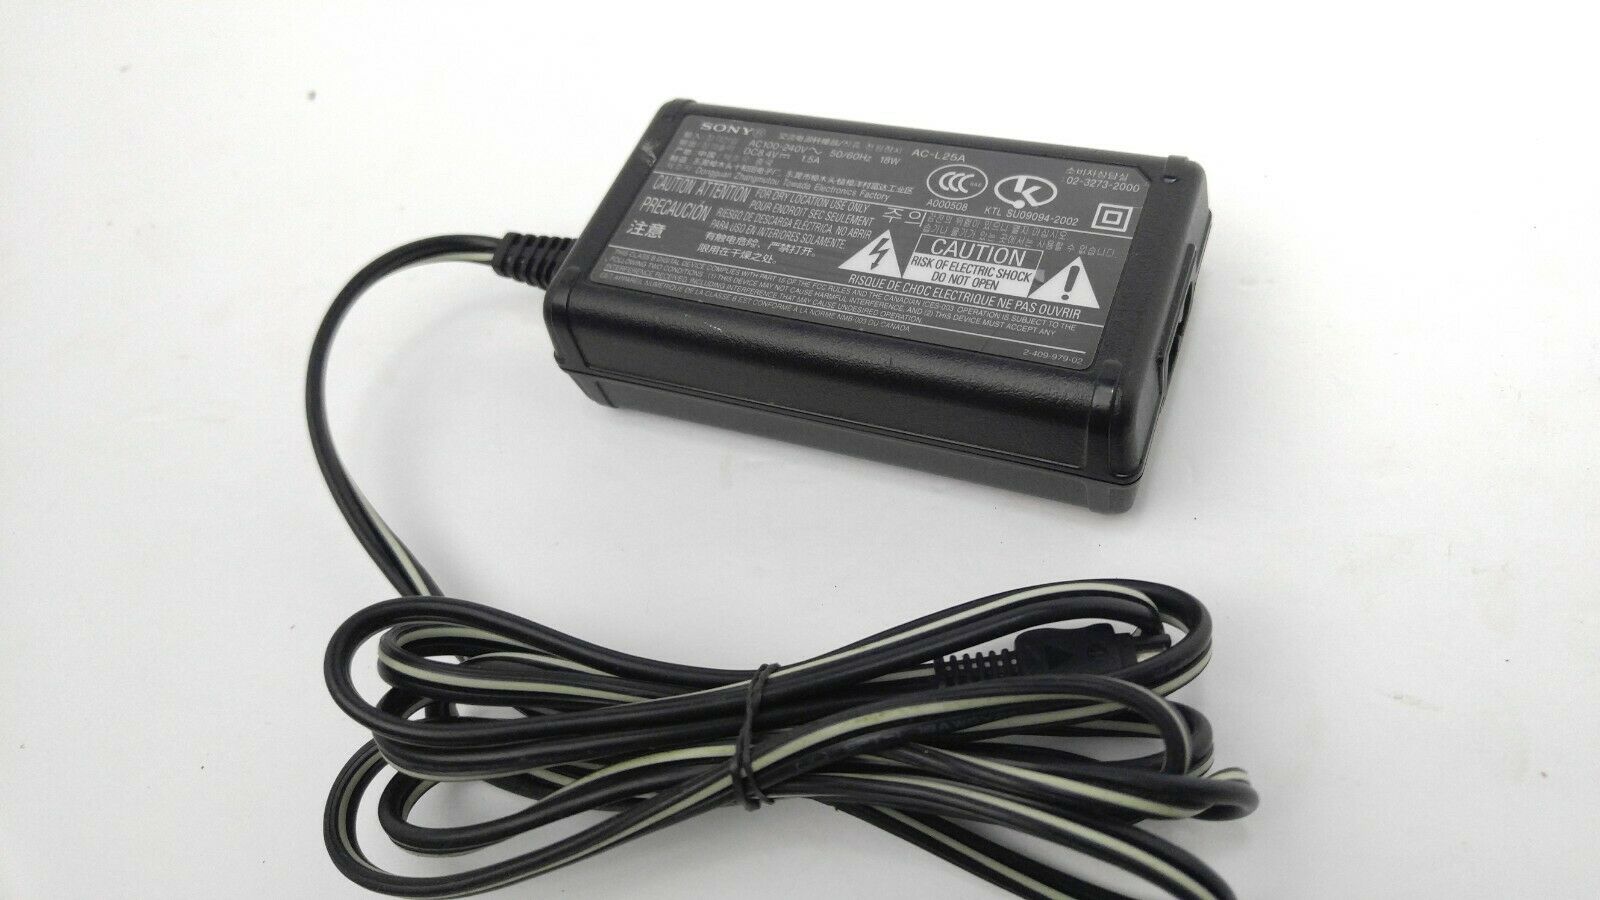 AC-L25A Sony AC Adapter for Handycam HDR-CX560 - Click Image to Close